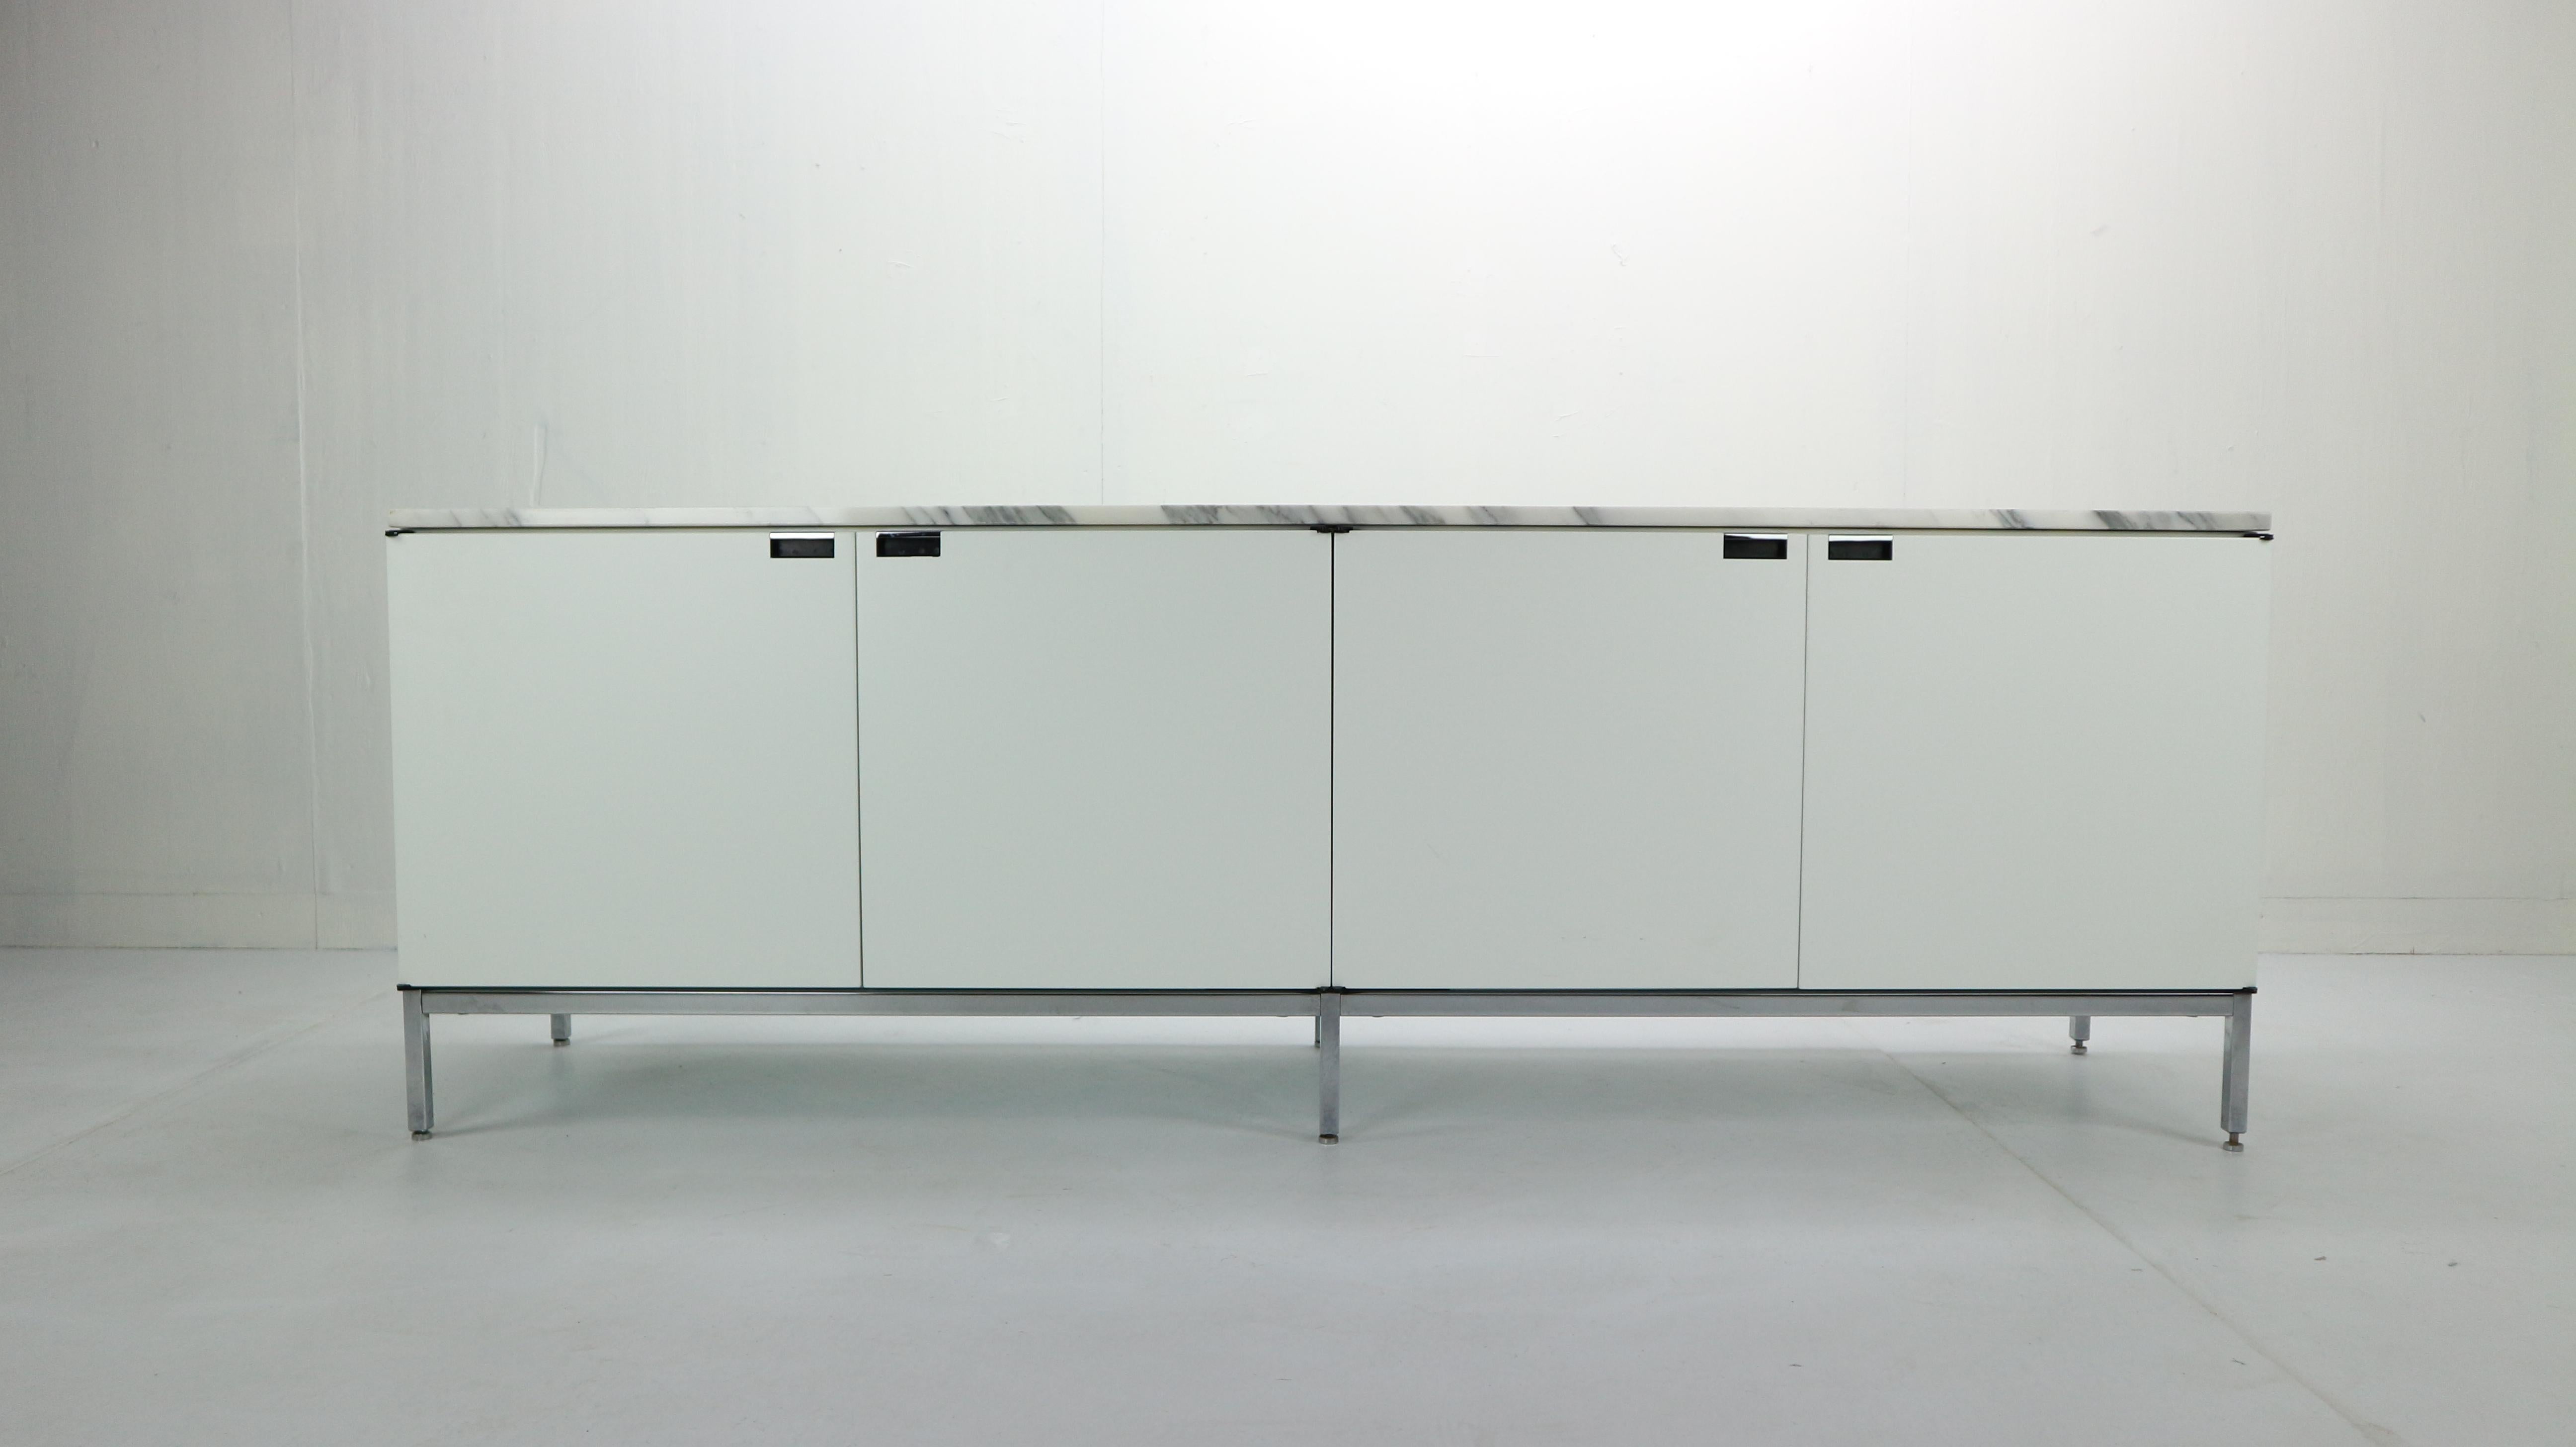 This Minimalist credenza was designed by Florence Knoll in 1961 for Knoll Int.
Florence Knoll revolutionized private office design by replacing the executive desk with a table, so she needed a place for all the stuff that’s normally in the desk